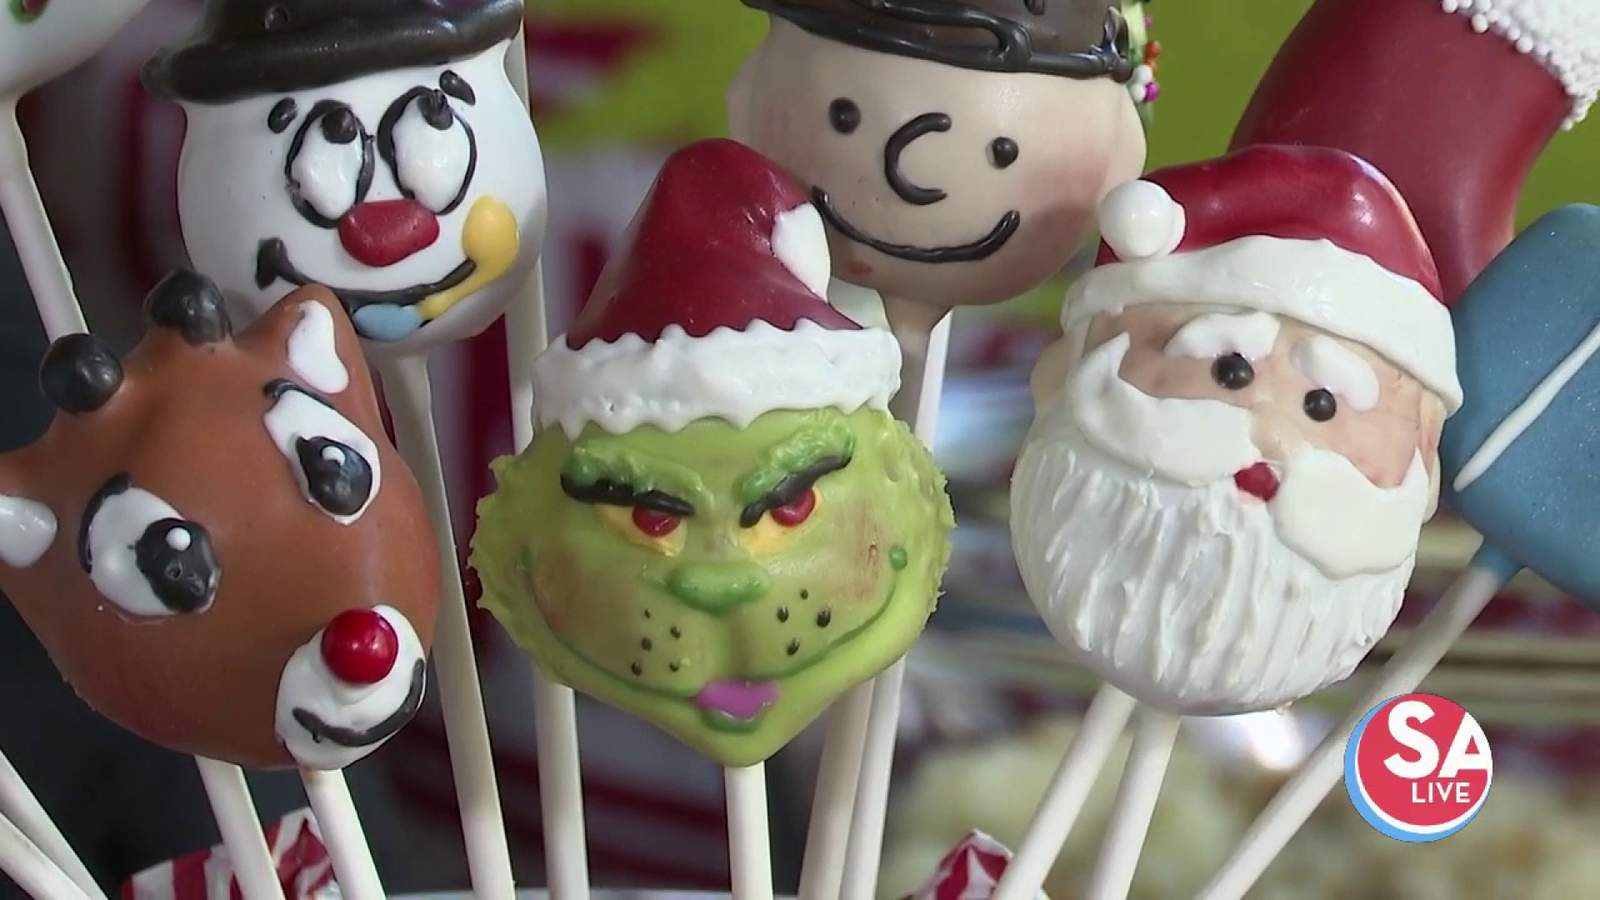 Holiday cake pop 101 with The Cake Pop Guy